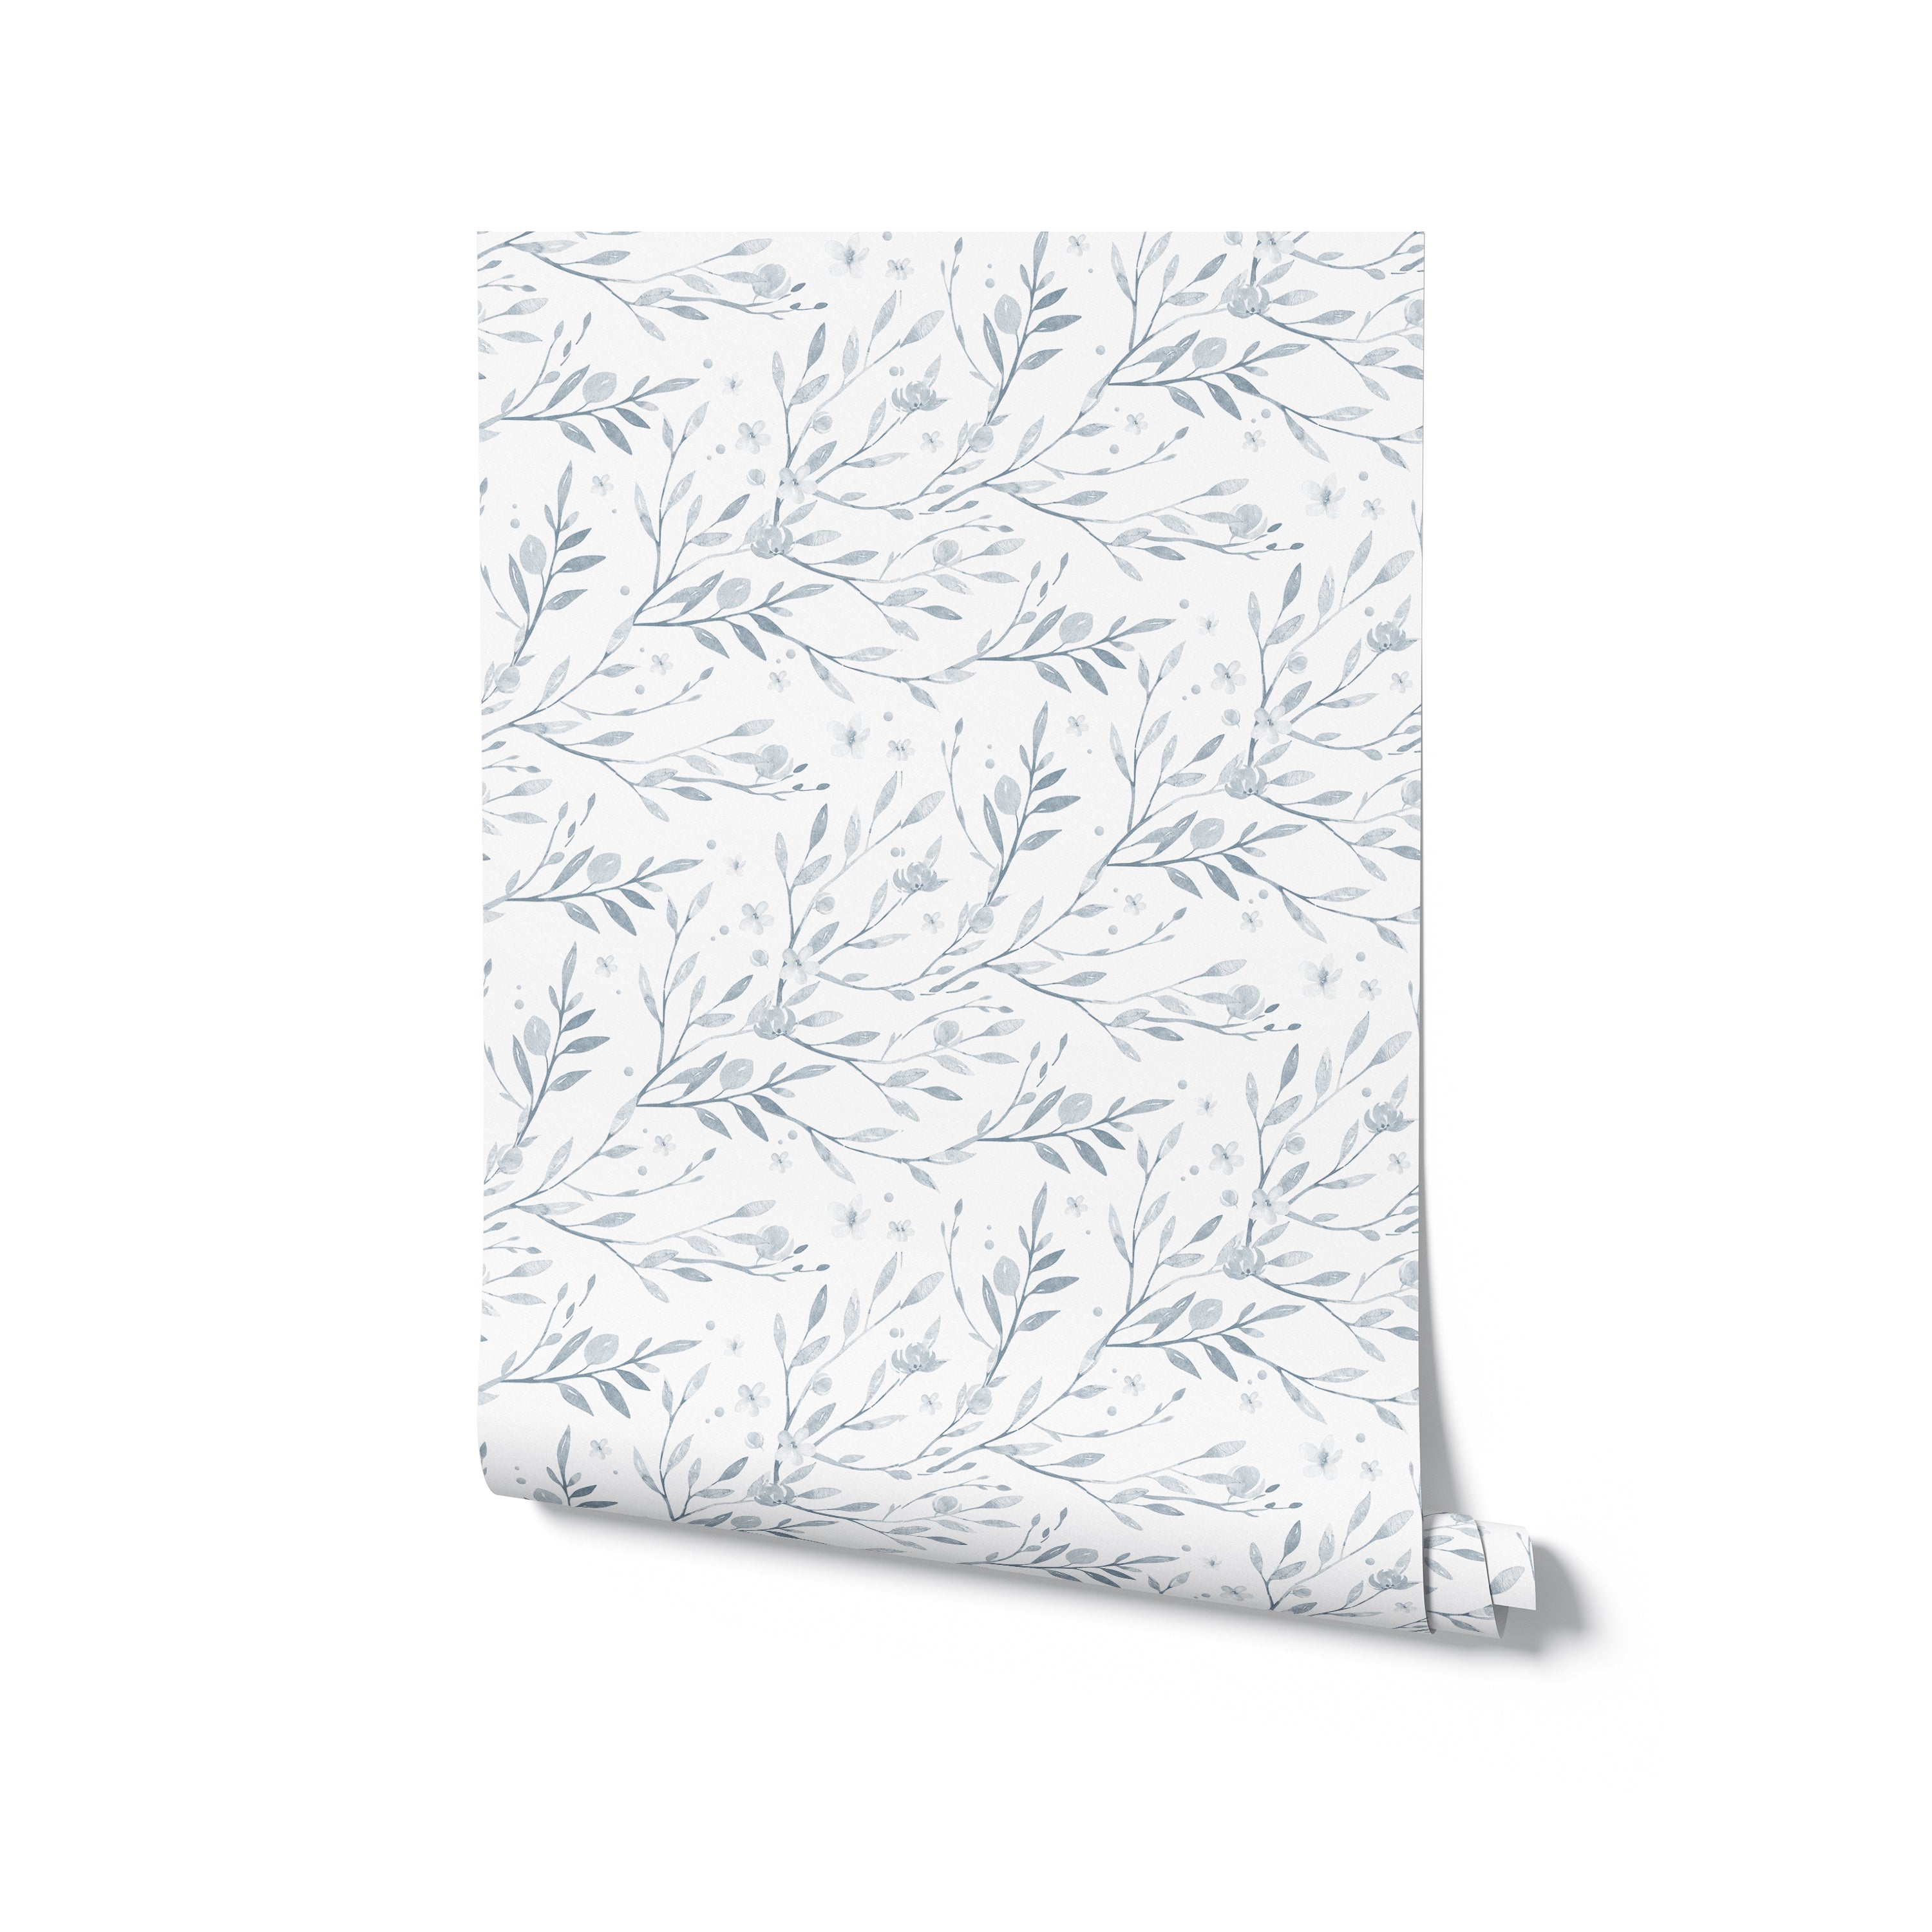 a roll of the Watercolor Spring Bird Wallpaper - Pale Blue, providing a clear view of how the design extends seamlessly when applied to a wall. The rolled wallpaper hints at the ease of application, while showcasing the continuity of the watercolor pattern, with its array of flora and fauna that would bring a sense of nature’s tranquility into a home.